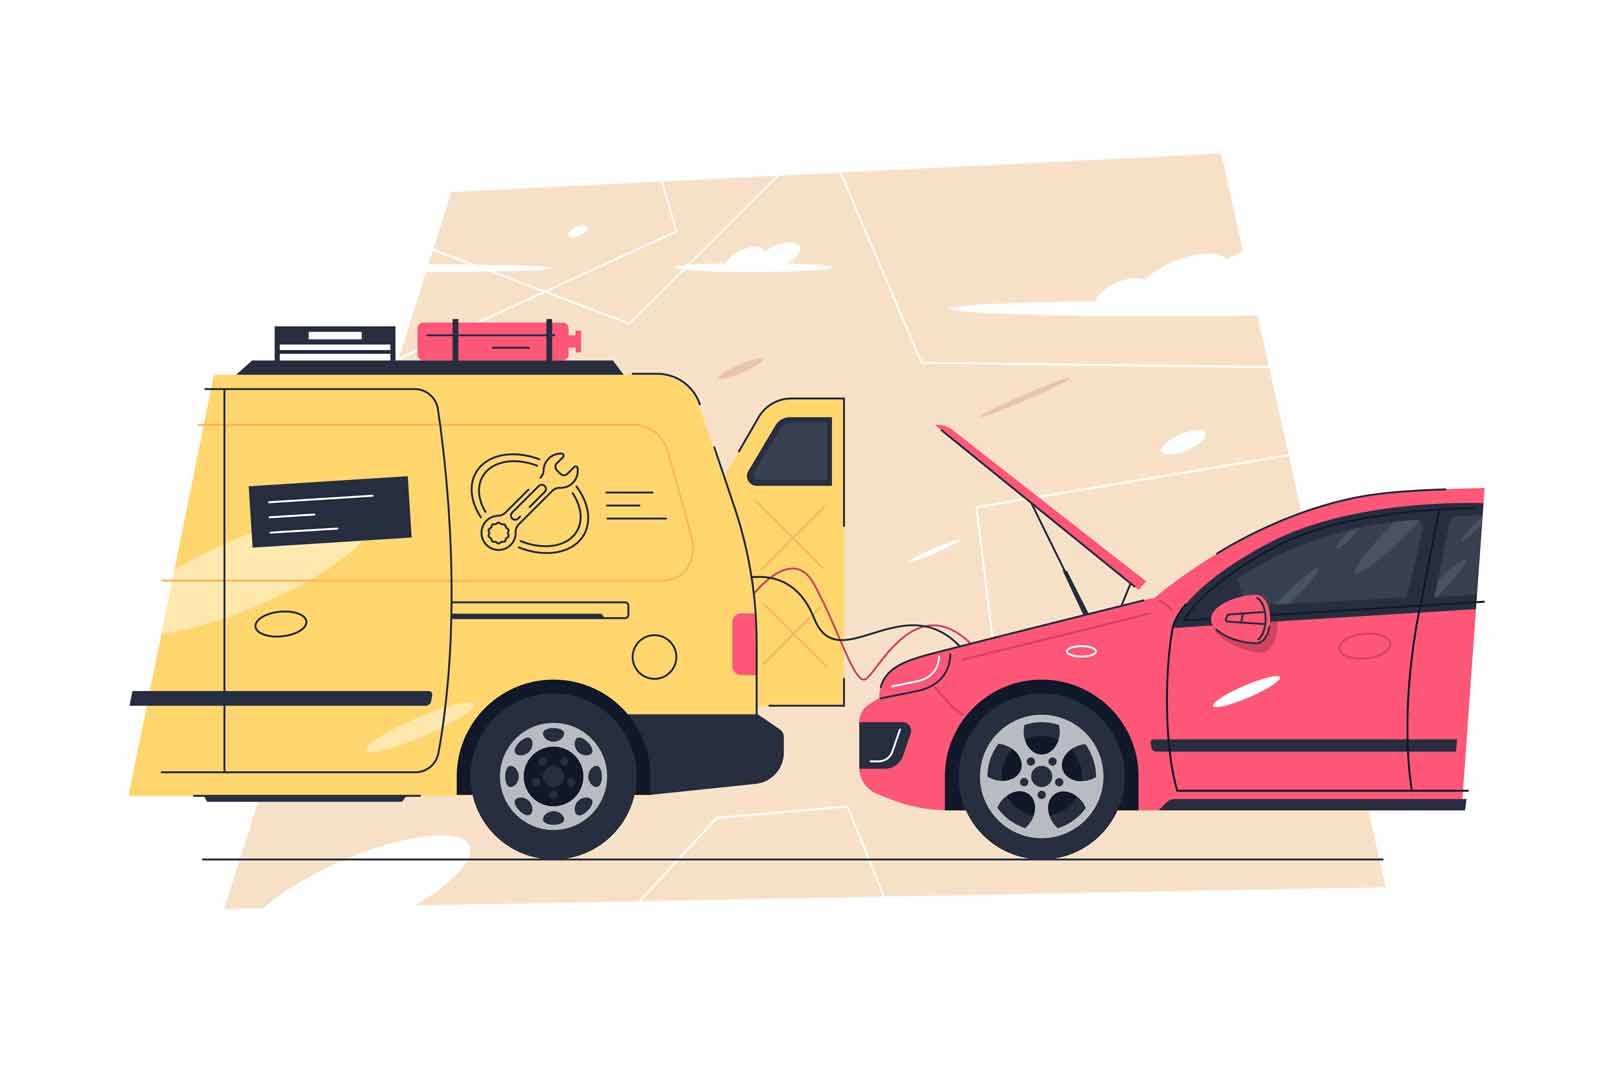 Online roadside assistance or automobile repair service vector illustration. Road accident or car trouble flat concept. Broken vehicle and emergency services